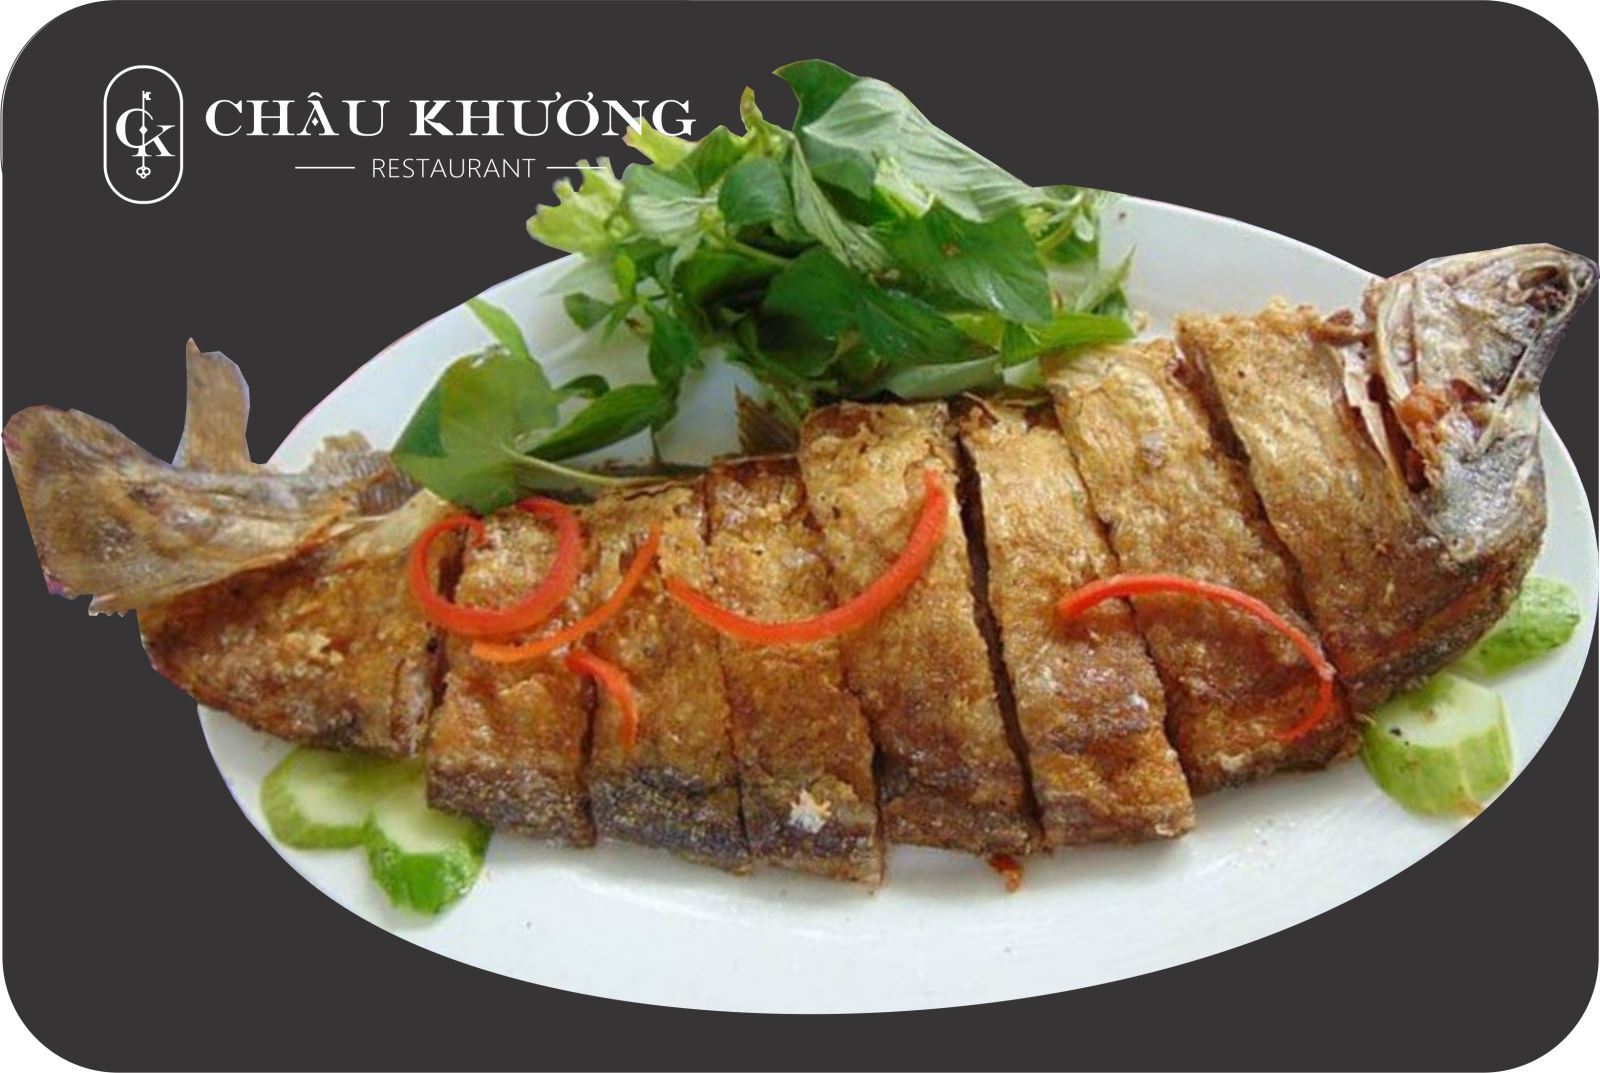 Fried That Lat fish (Clown Knife fish) without bone with green mango